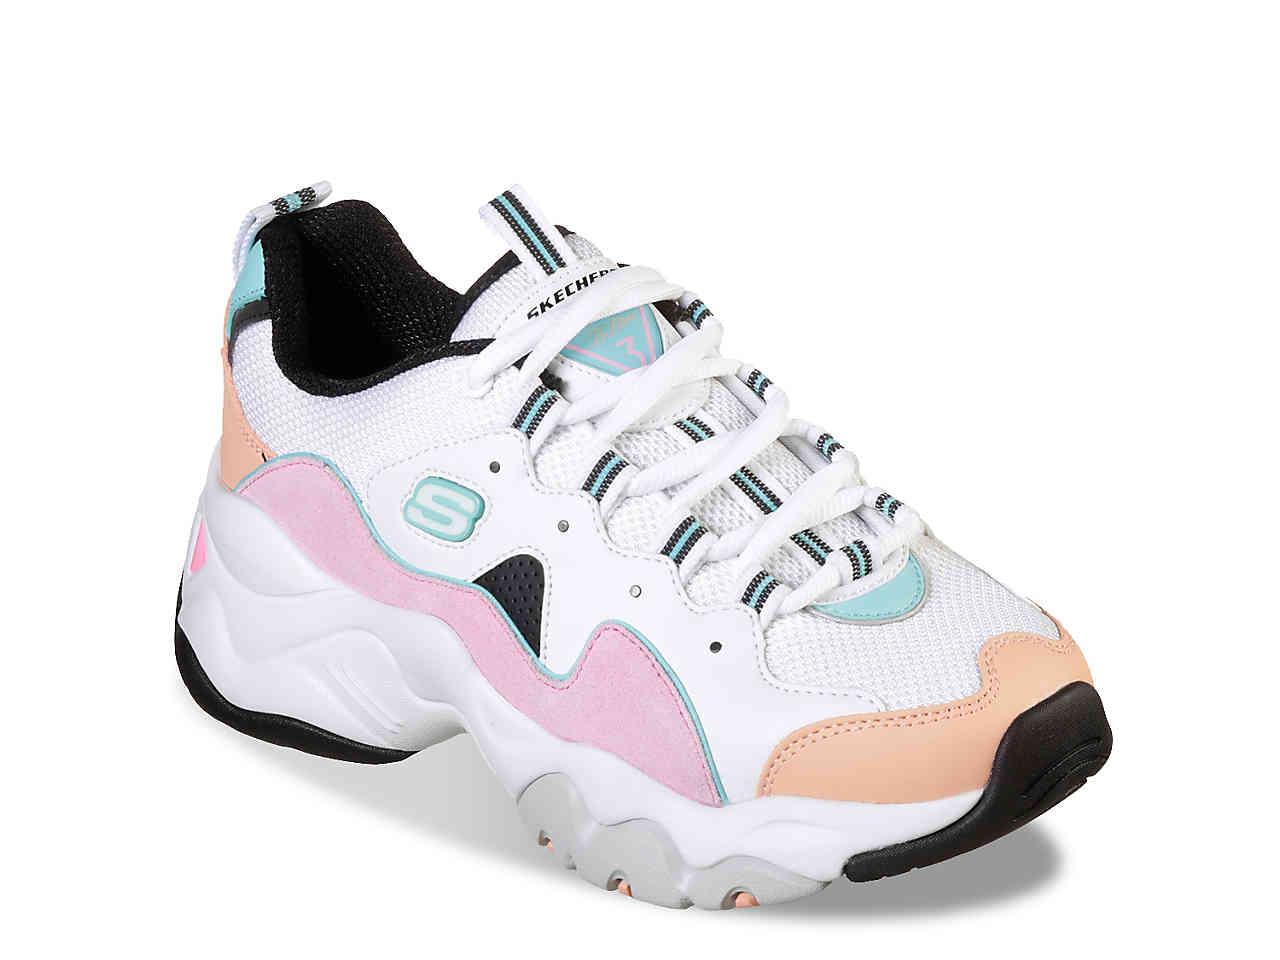 Skechers Rubber D'lite Chunky Trainers 3.0 In Pastel | Lyst